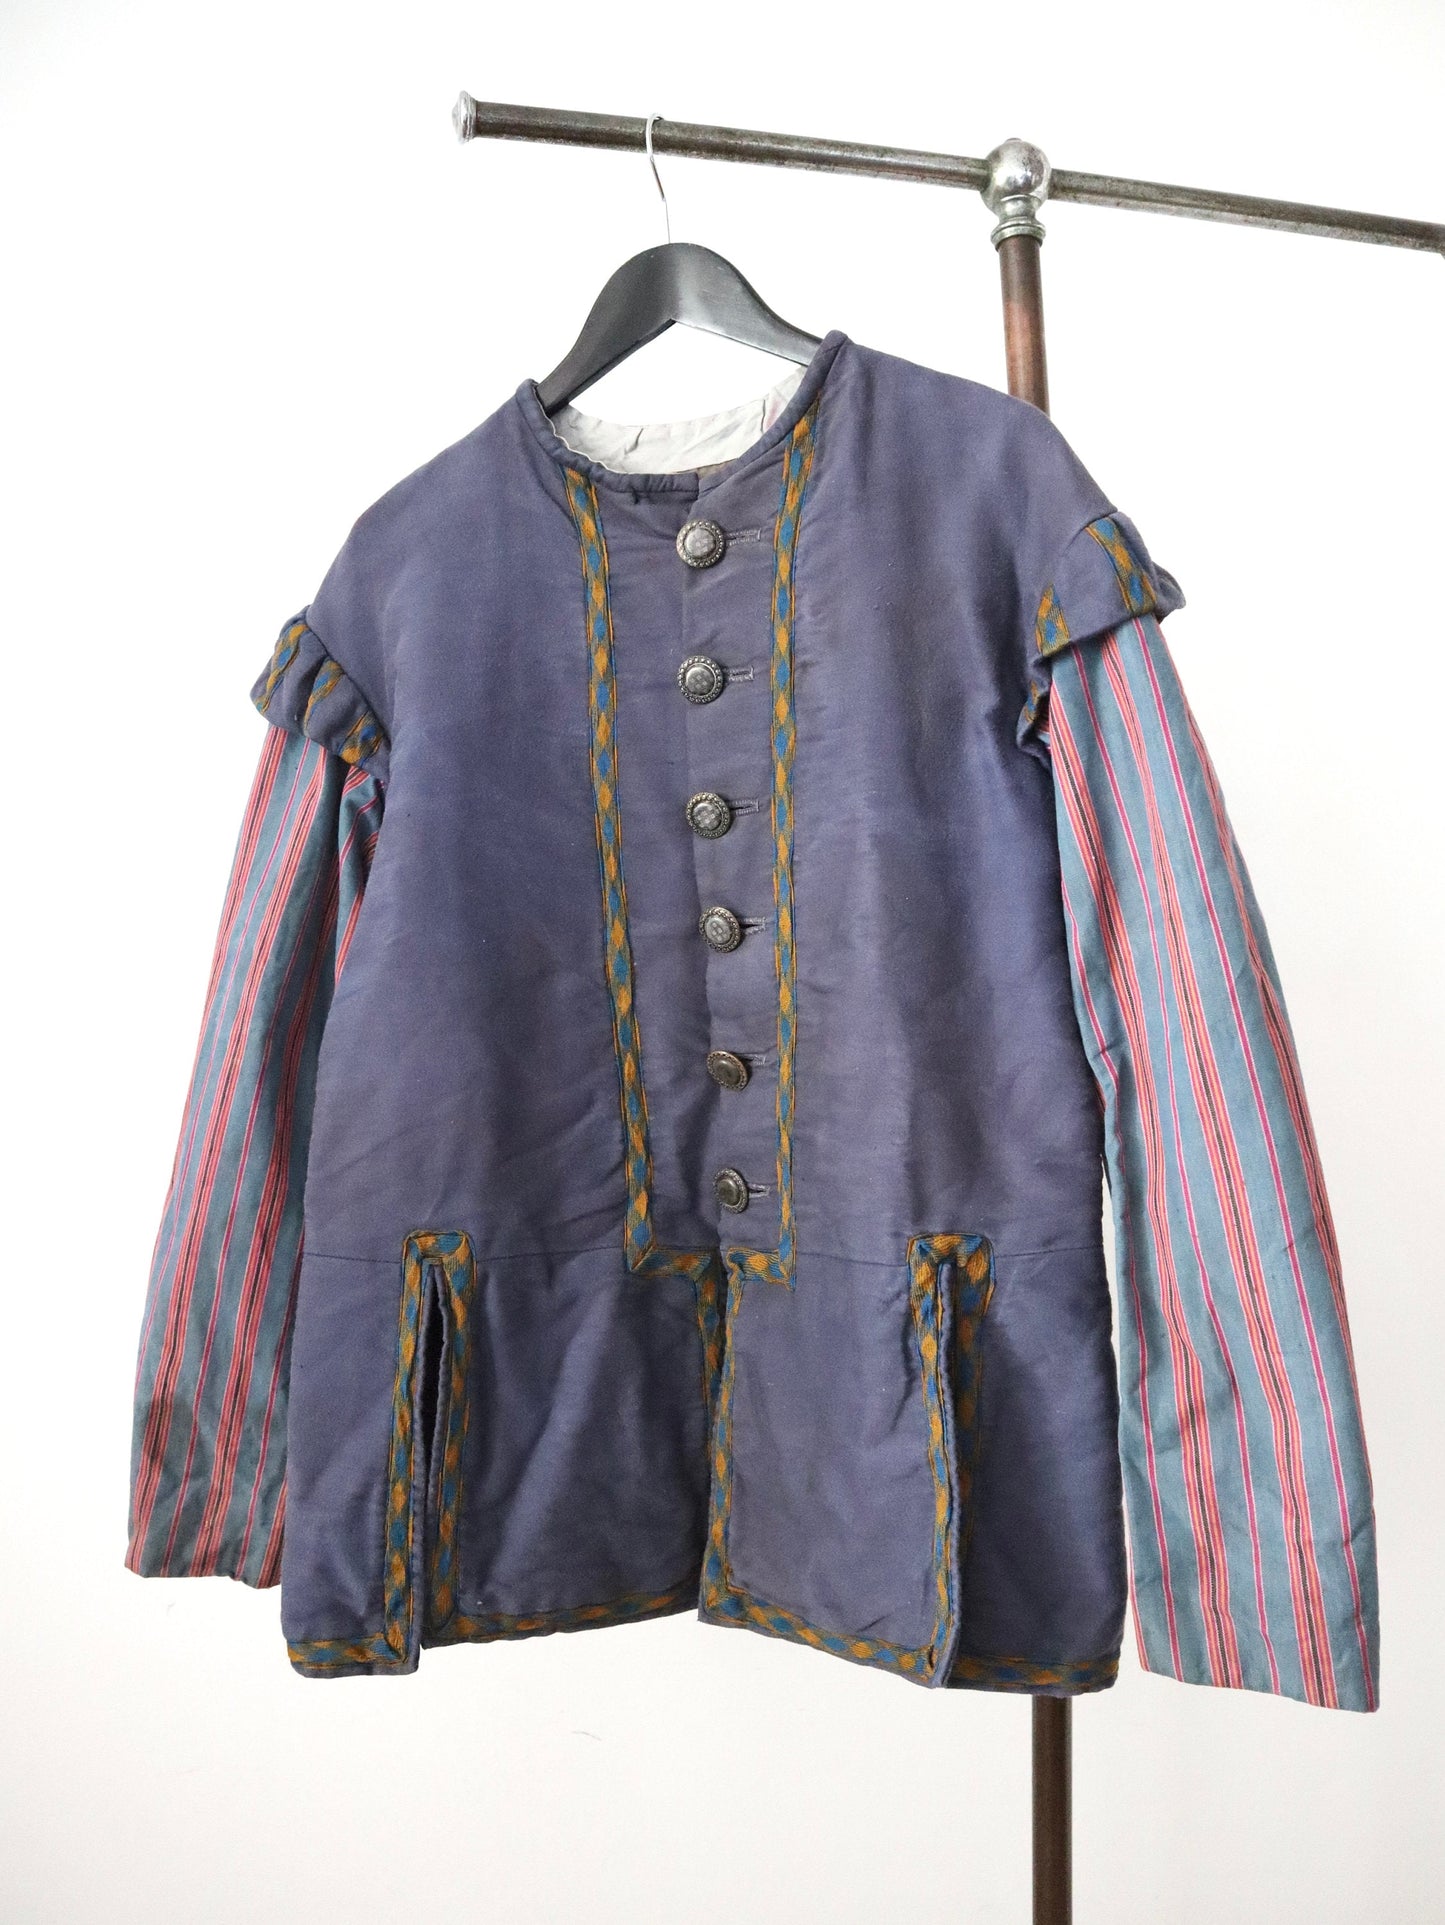 Antique French Theatre Costume Jacket Tunic Blue Red Stripe Sleeves Renaissance Style Early 1900s